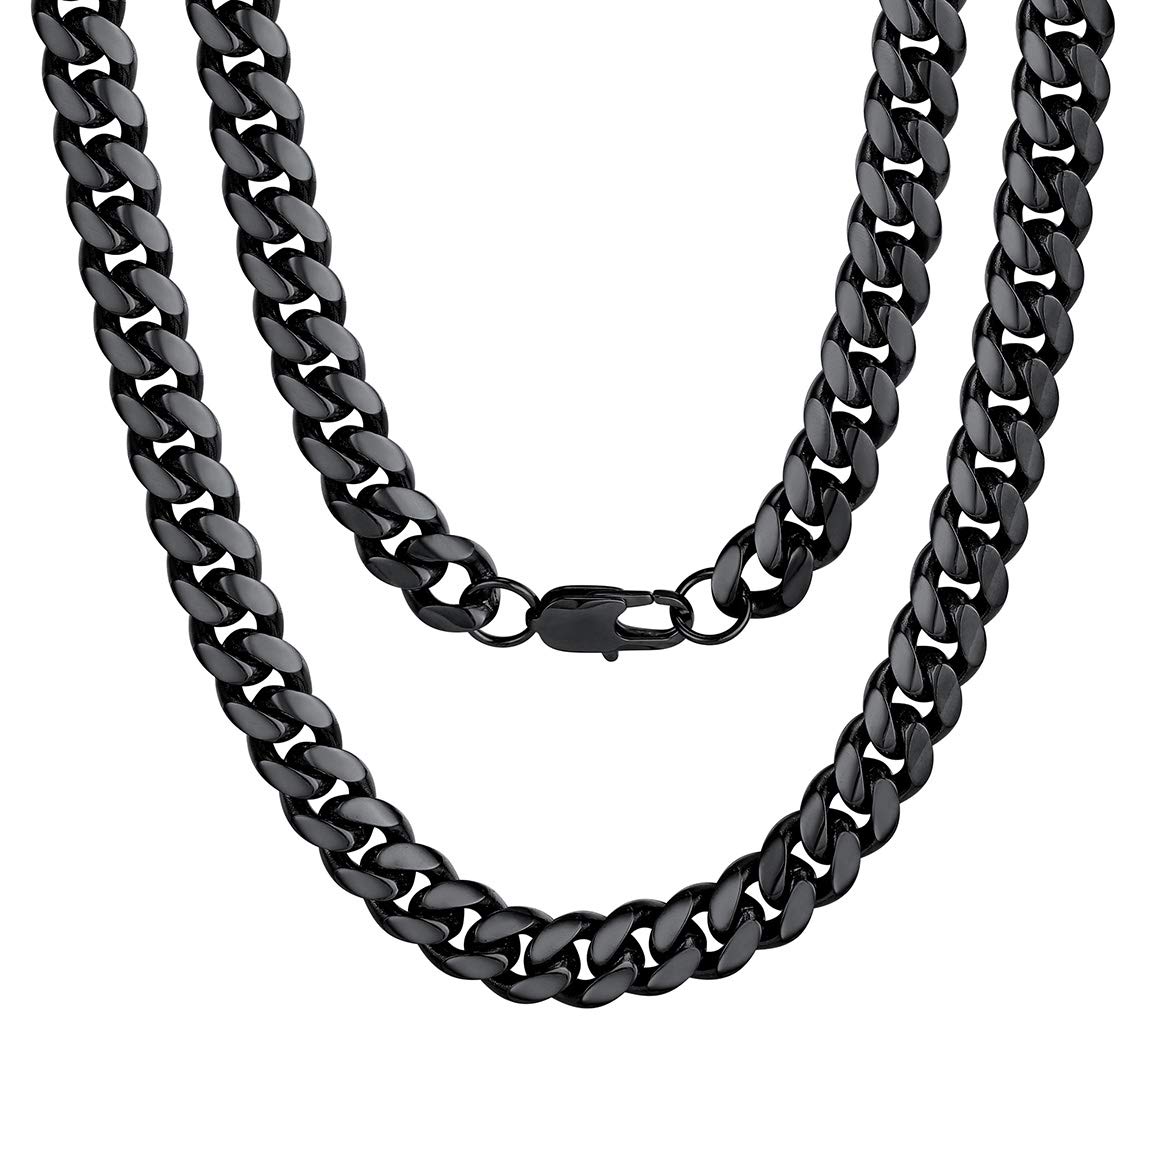 ChainsPro Mens Necklace Chains Stainless Steel Cuban Chain Necklace 24 Inch Jewelry Mens Gifts for Dad